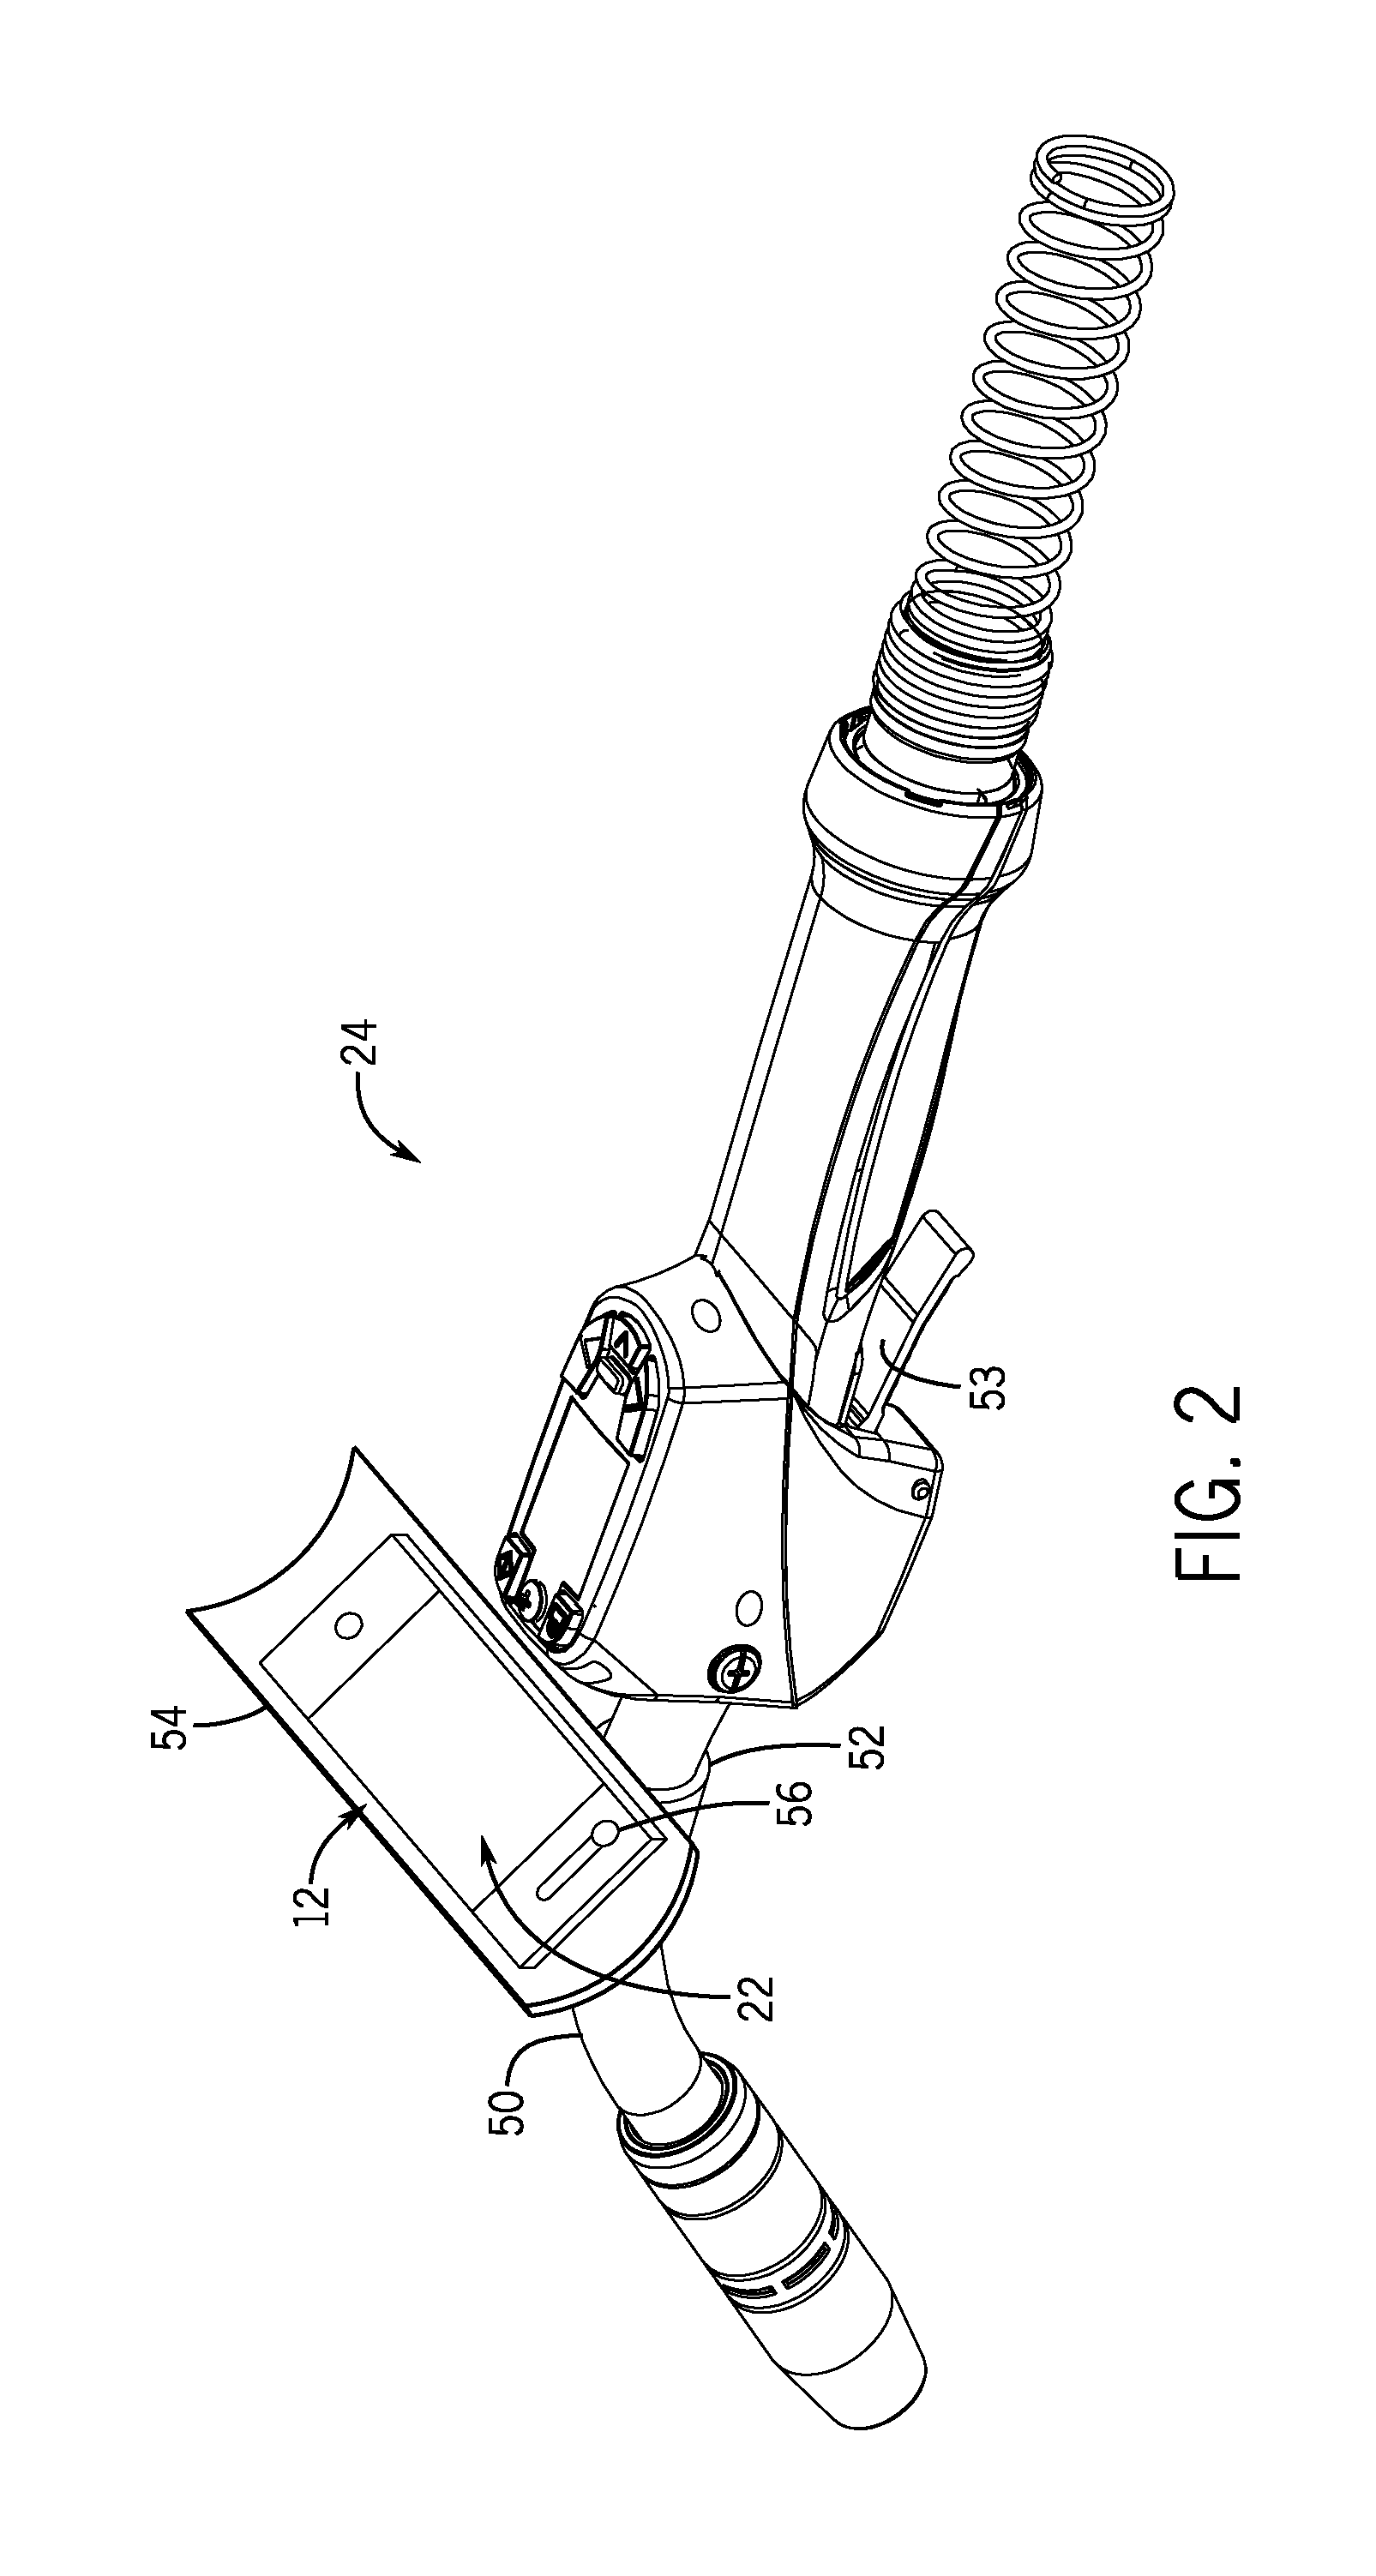 Systems and methods for a weld training system